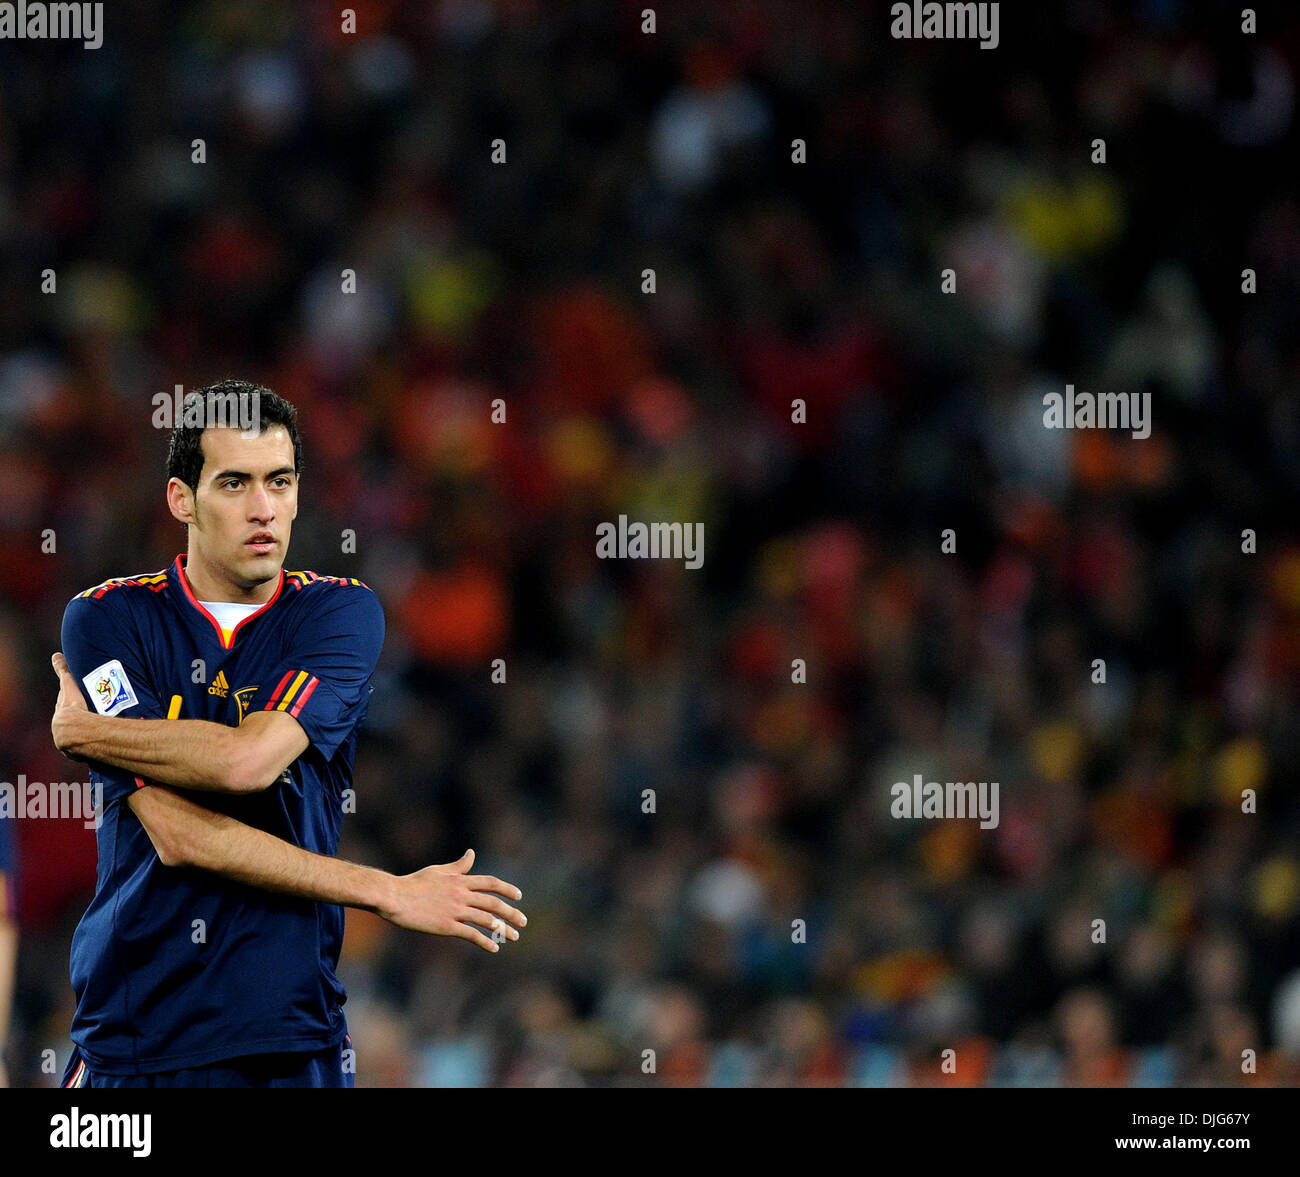 July 11, 2010 - Johannesburg, South Africa - Sergio Busquets of Netherlands is seen during the 2010 FIFA World Cup Final soccer match between Netherlands and Spain at Soccer City Stadium on July 11, 2010 in Johannesburg, South Africa. (Credit Image: © Luca Ghidoni/ZUMApress.com) Stock Photo